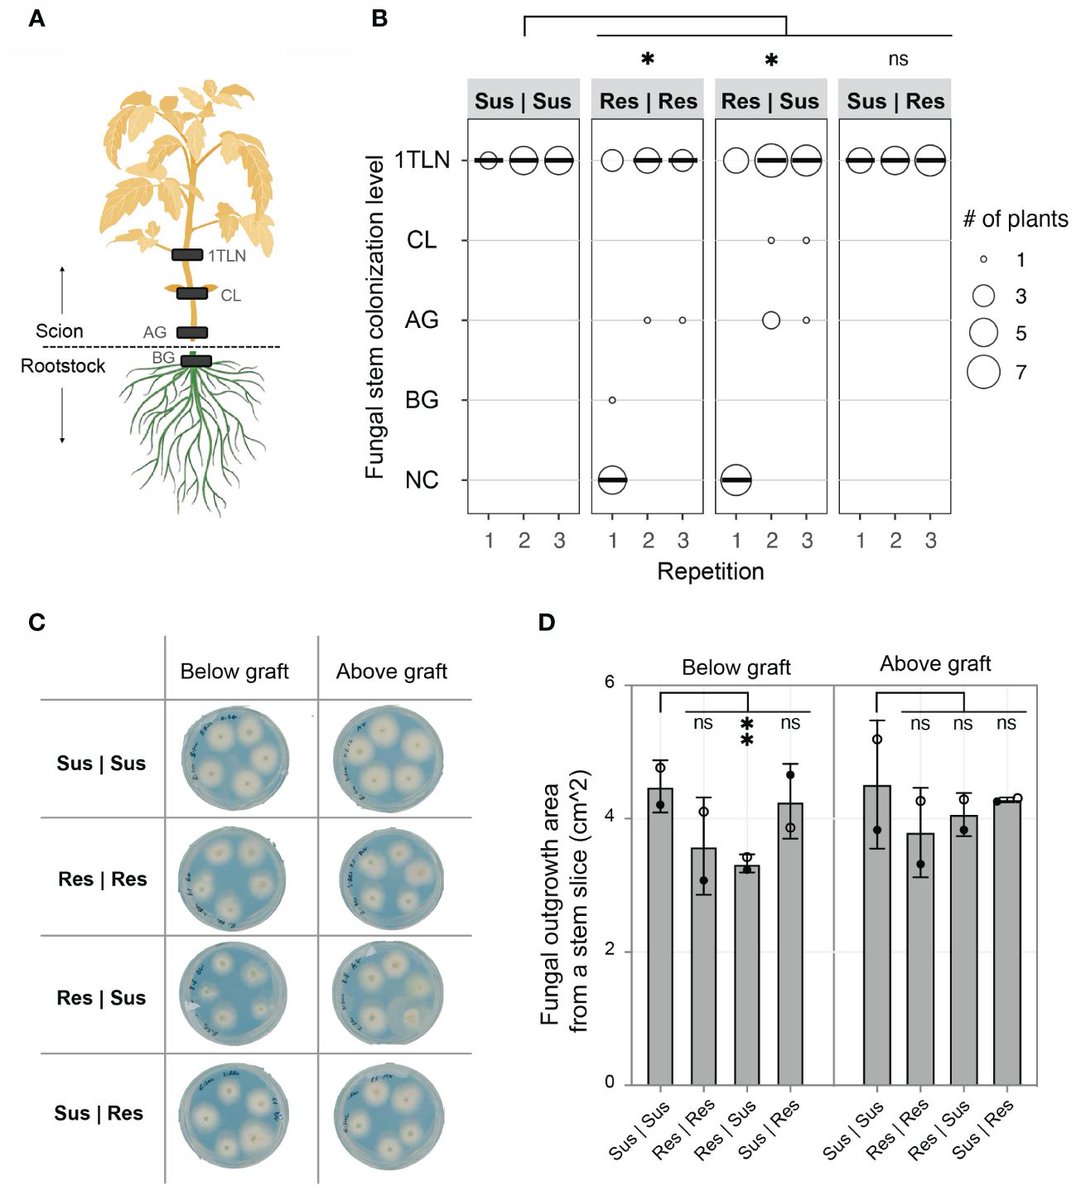 Tomato R-gene-mediated resistance against Fusarium wilt originates in roots and extends to shoots via xylem to limit pathogen colonization @TakkenLab frontiersin.org/journals/plant…